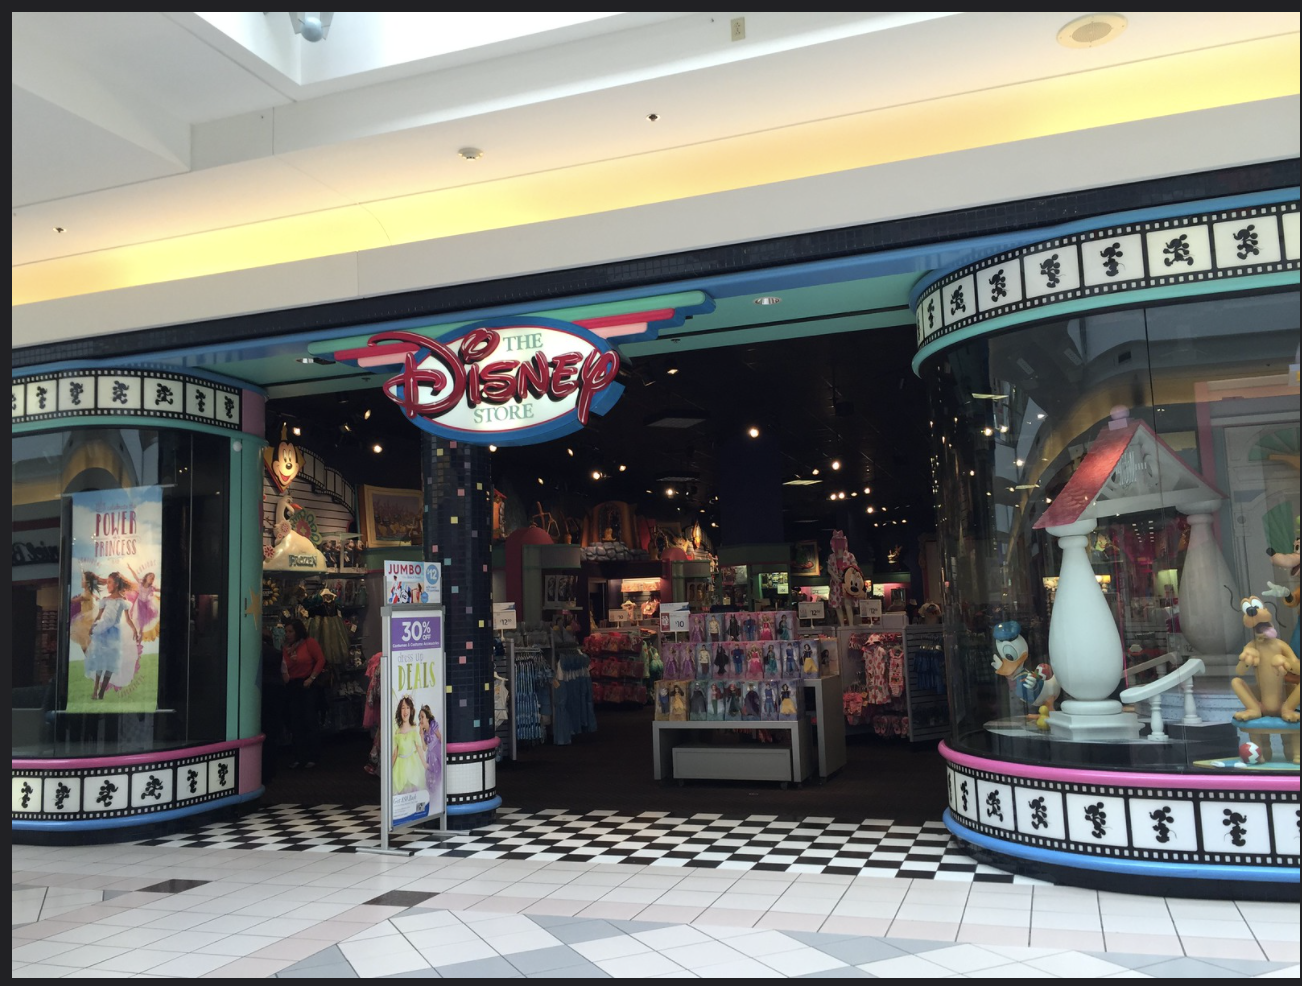 The Disney Store, Ghosts of Retailers' past Wiki